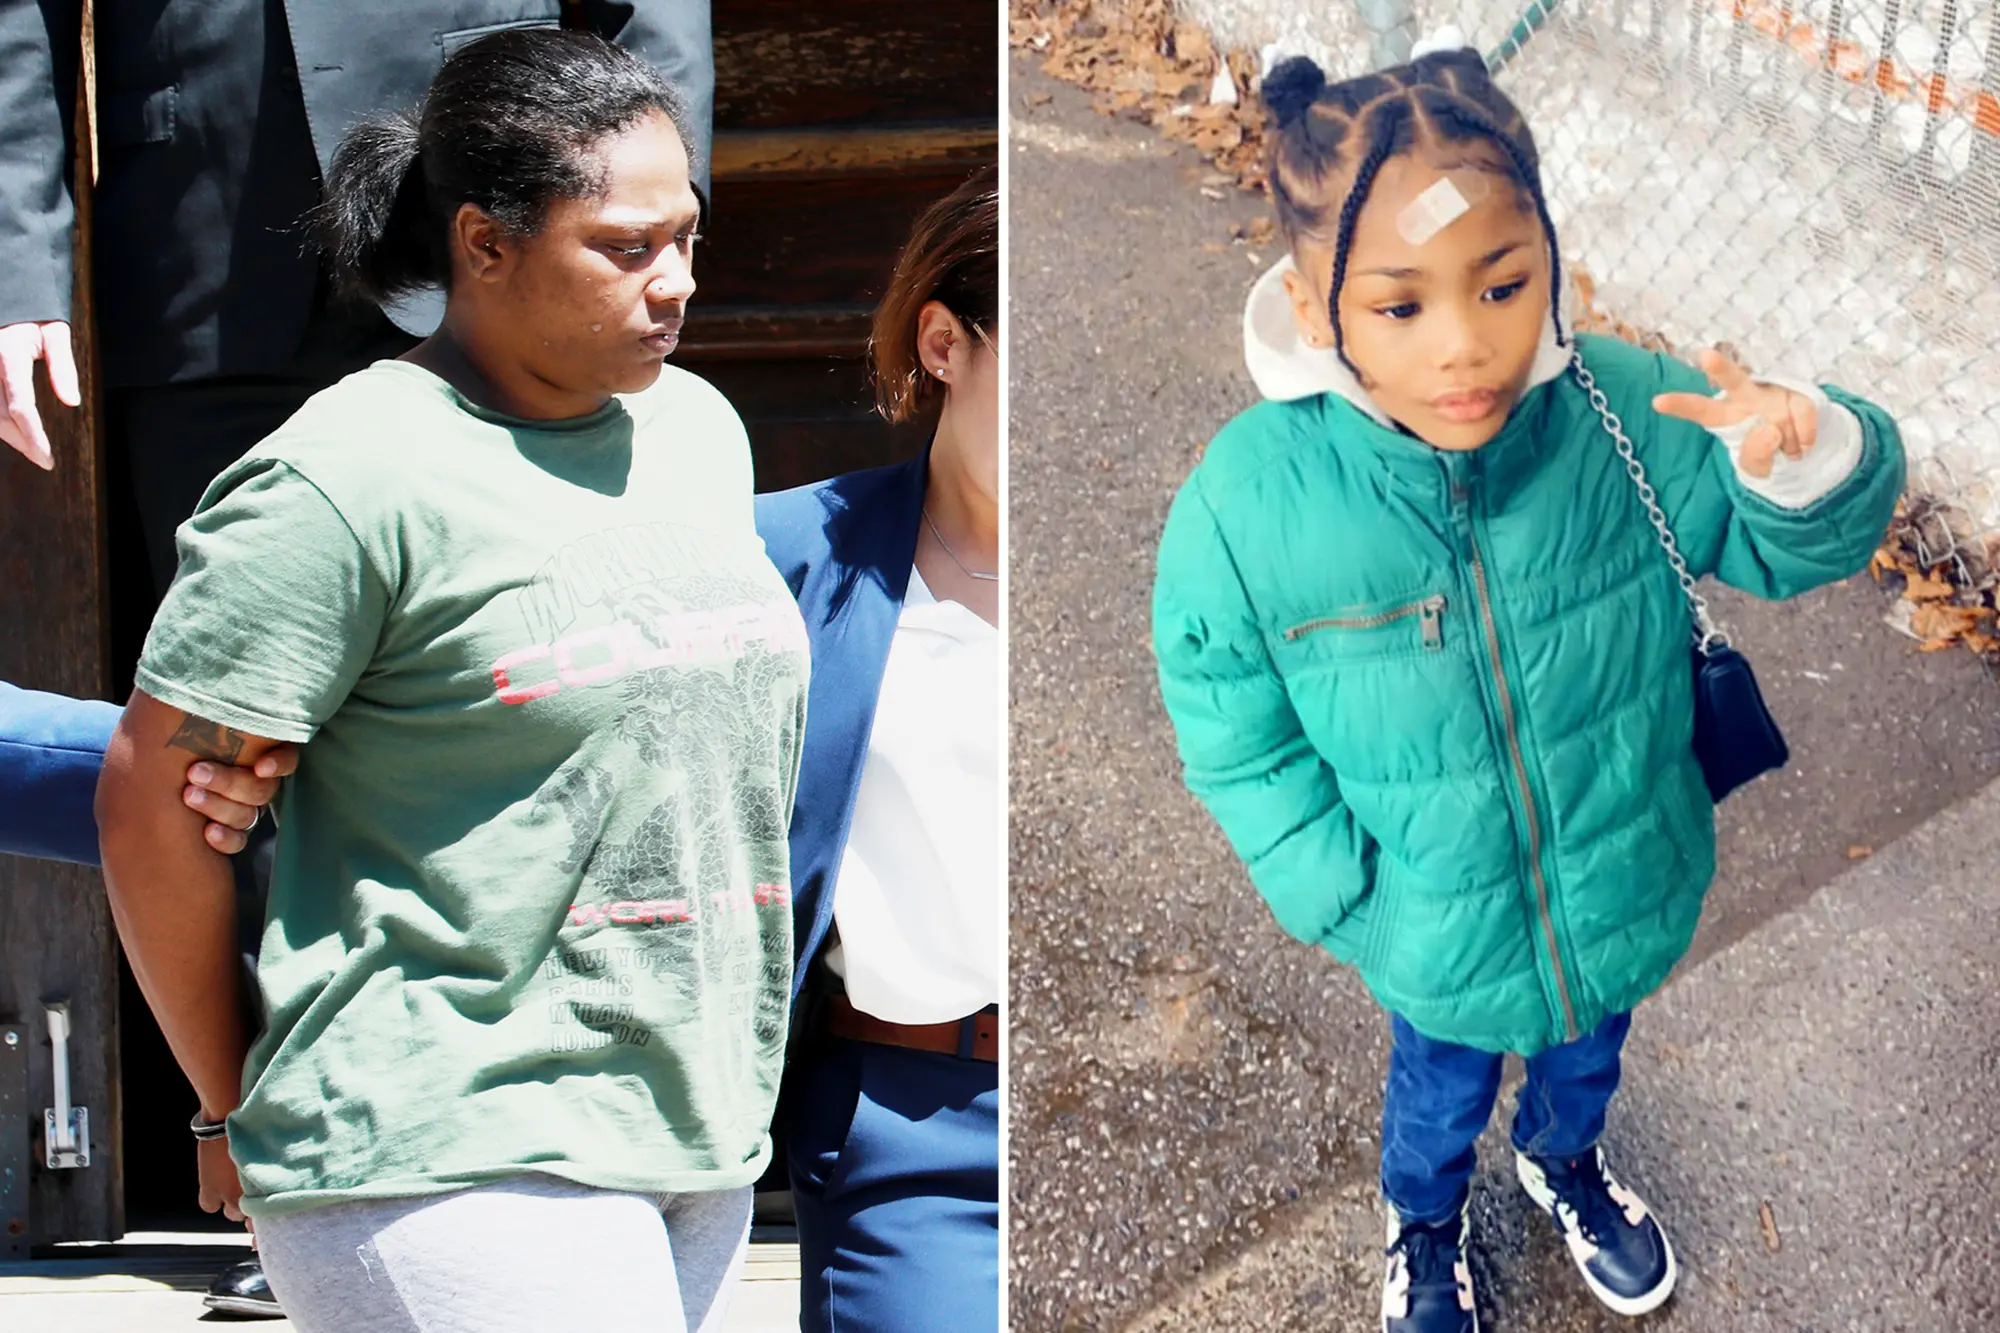 Tragic Incident Unfolds: New York City Mother Accused of Horrific Abuse Leading to Daughter's Death